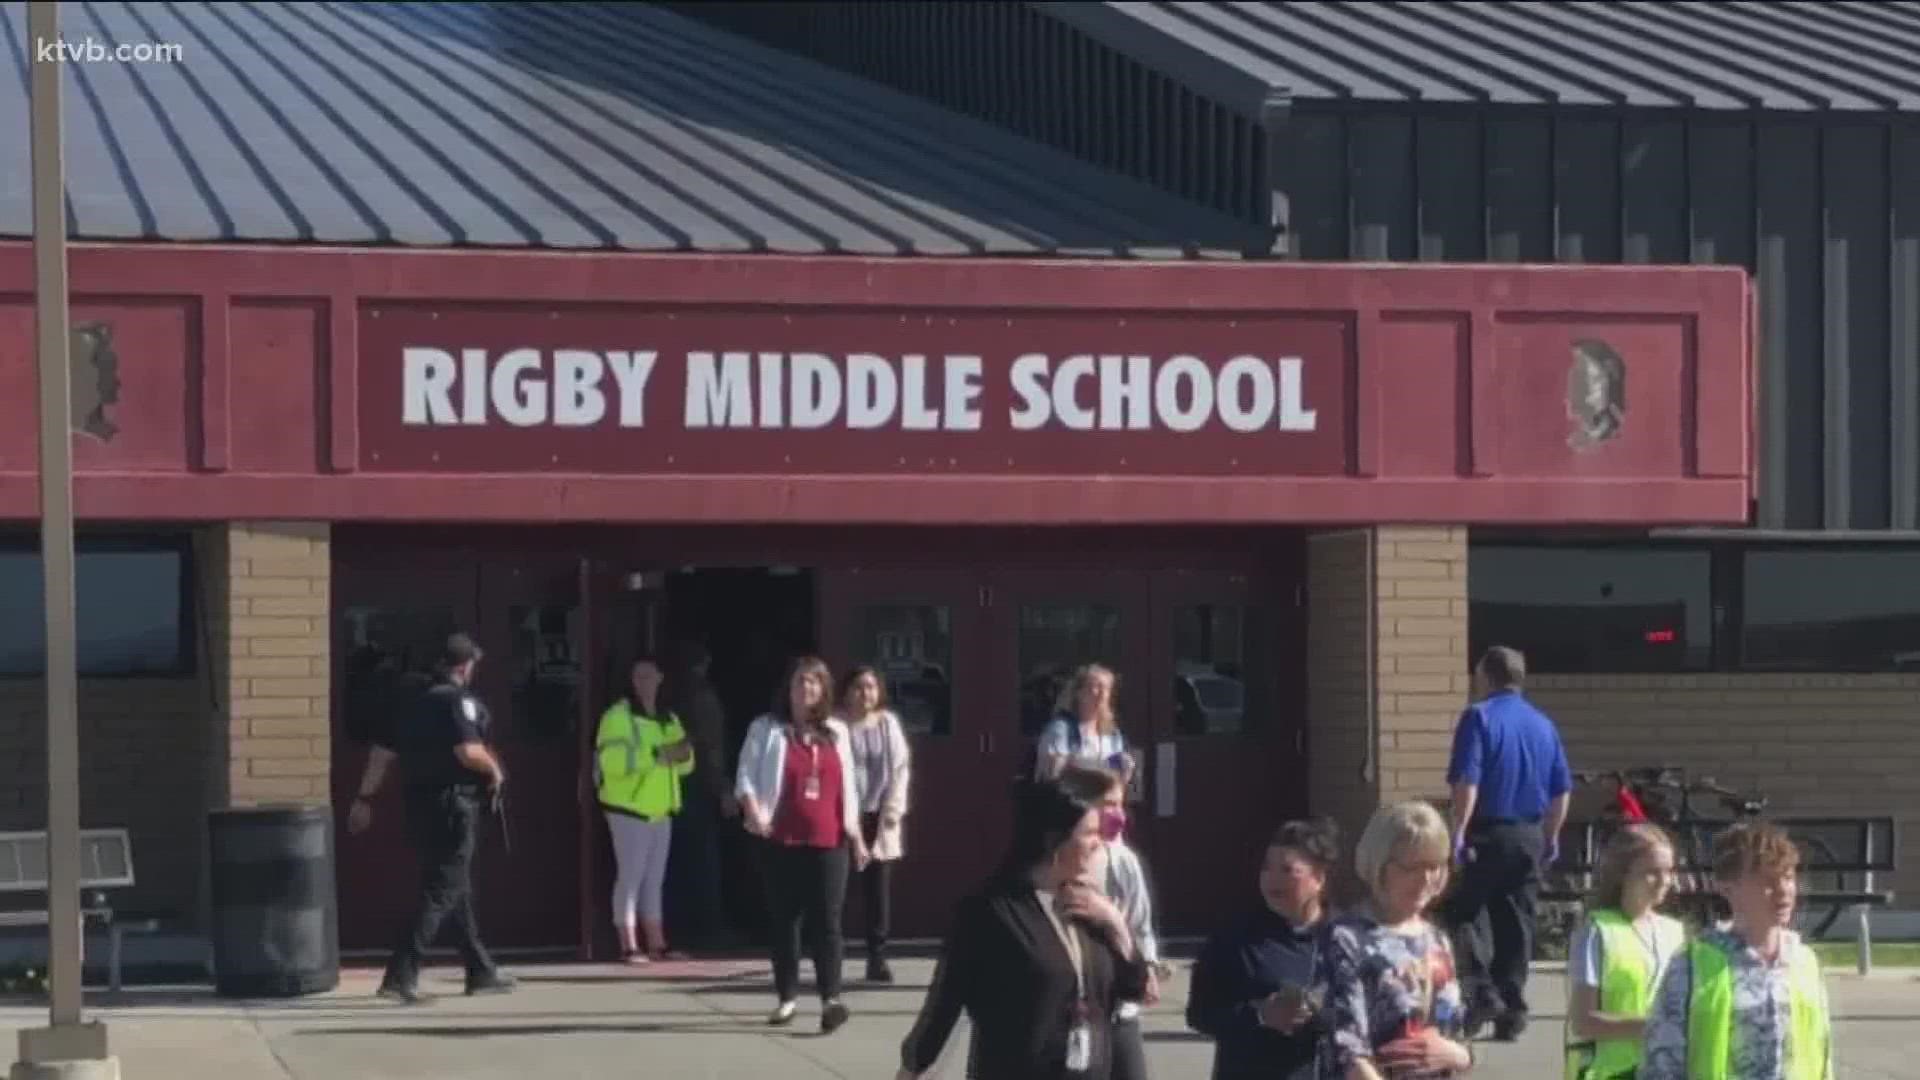 The Rigby Middle School shooting post-incident report outlines 29 recommendations to keep schools safe. This includes reporting abnormal behavior or changes.